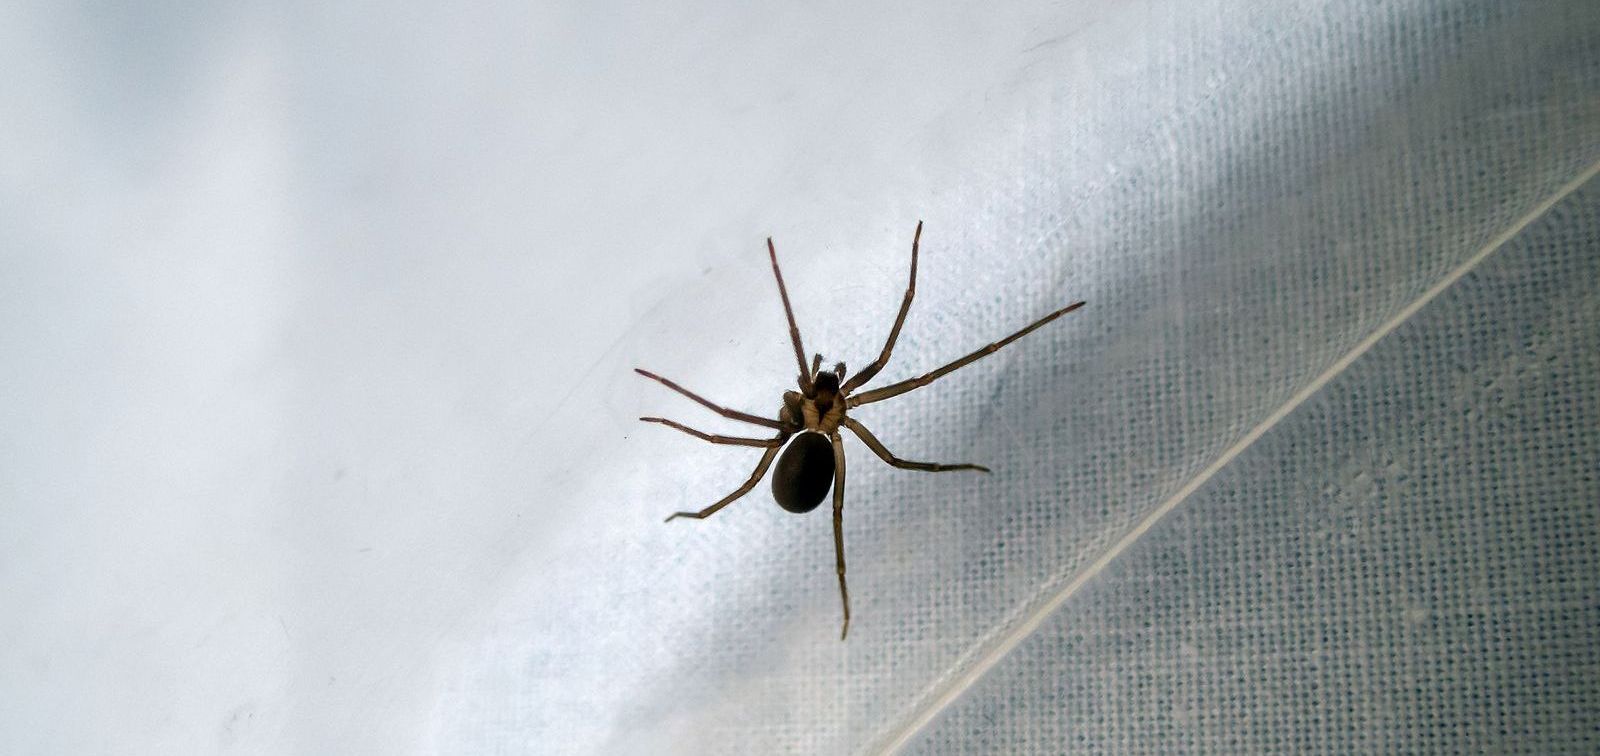 highly venomous brown recluse spider